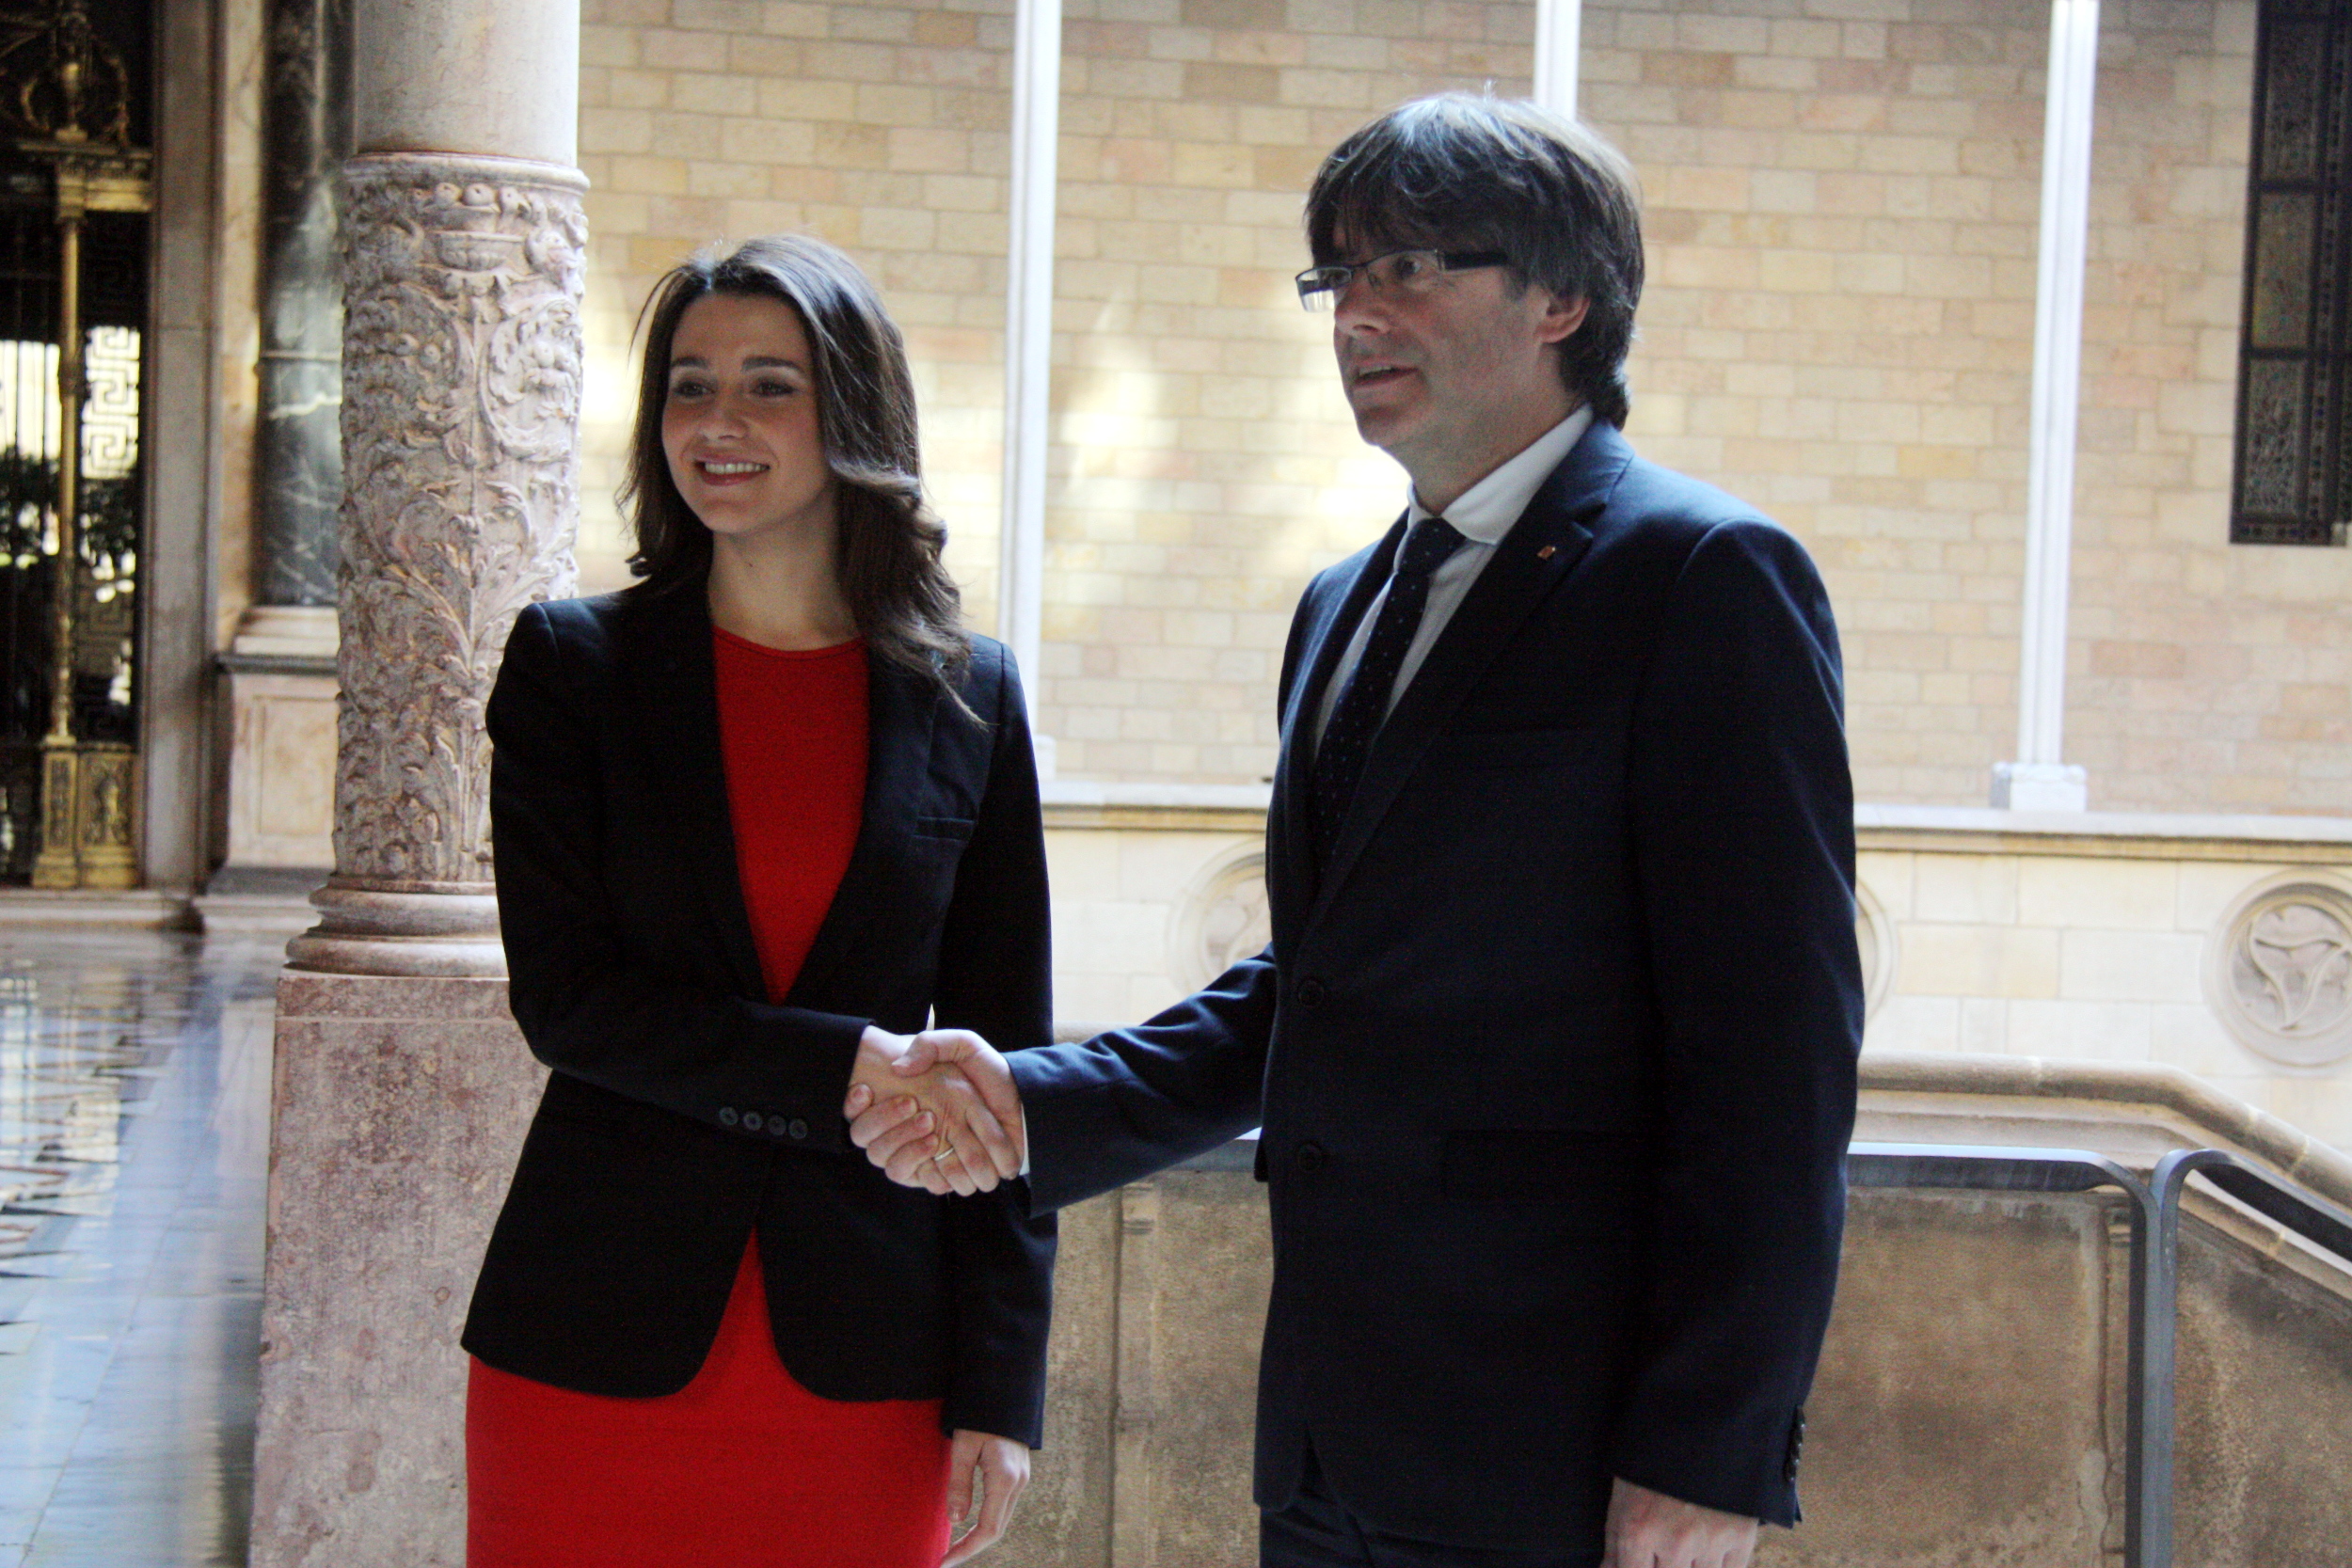 The new Catalan President, Carles Puigdemont and the Leader of the Opposition, Inés Arrimadas met this Wednesday at Palau de la Generalitat (by ACN)